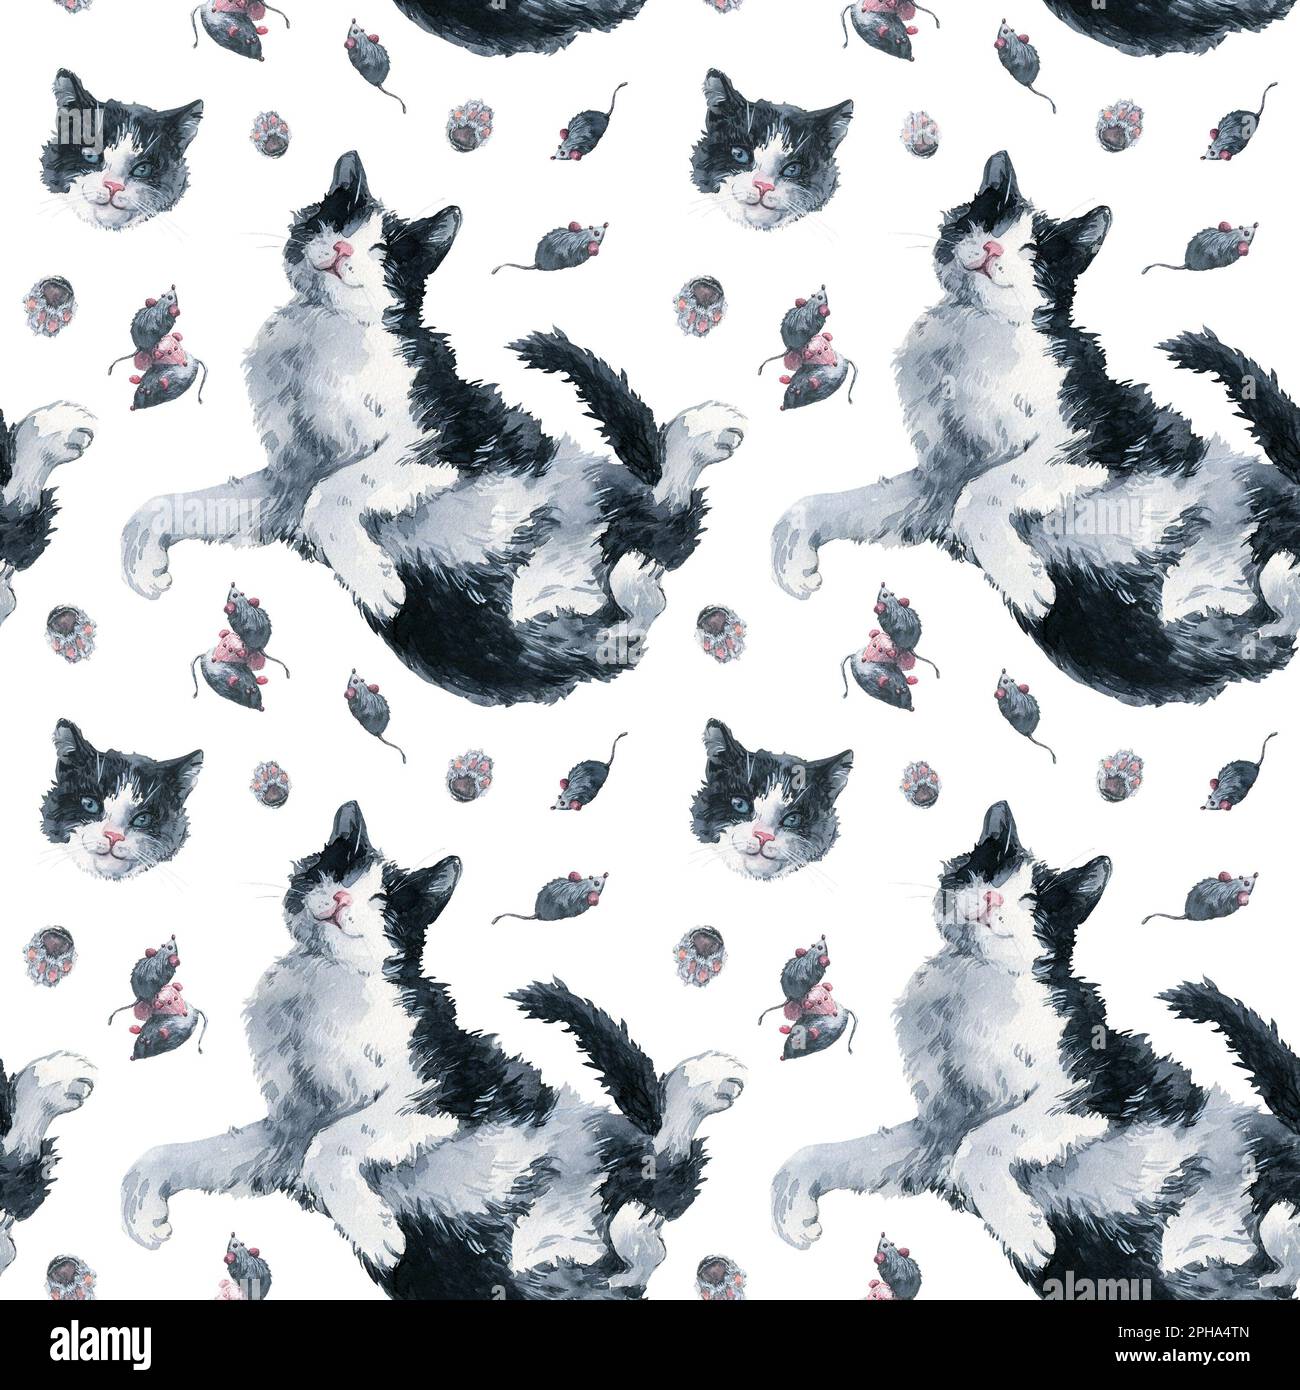 Cute bicolor black and white cat and toy mouses seamless pattern. Watercolor painting on white background. Graphic for fabric, wrapping paper Stock Photo